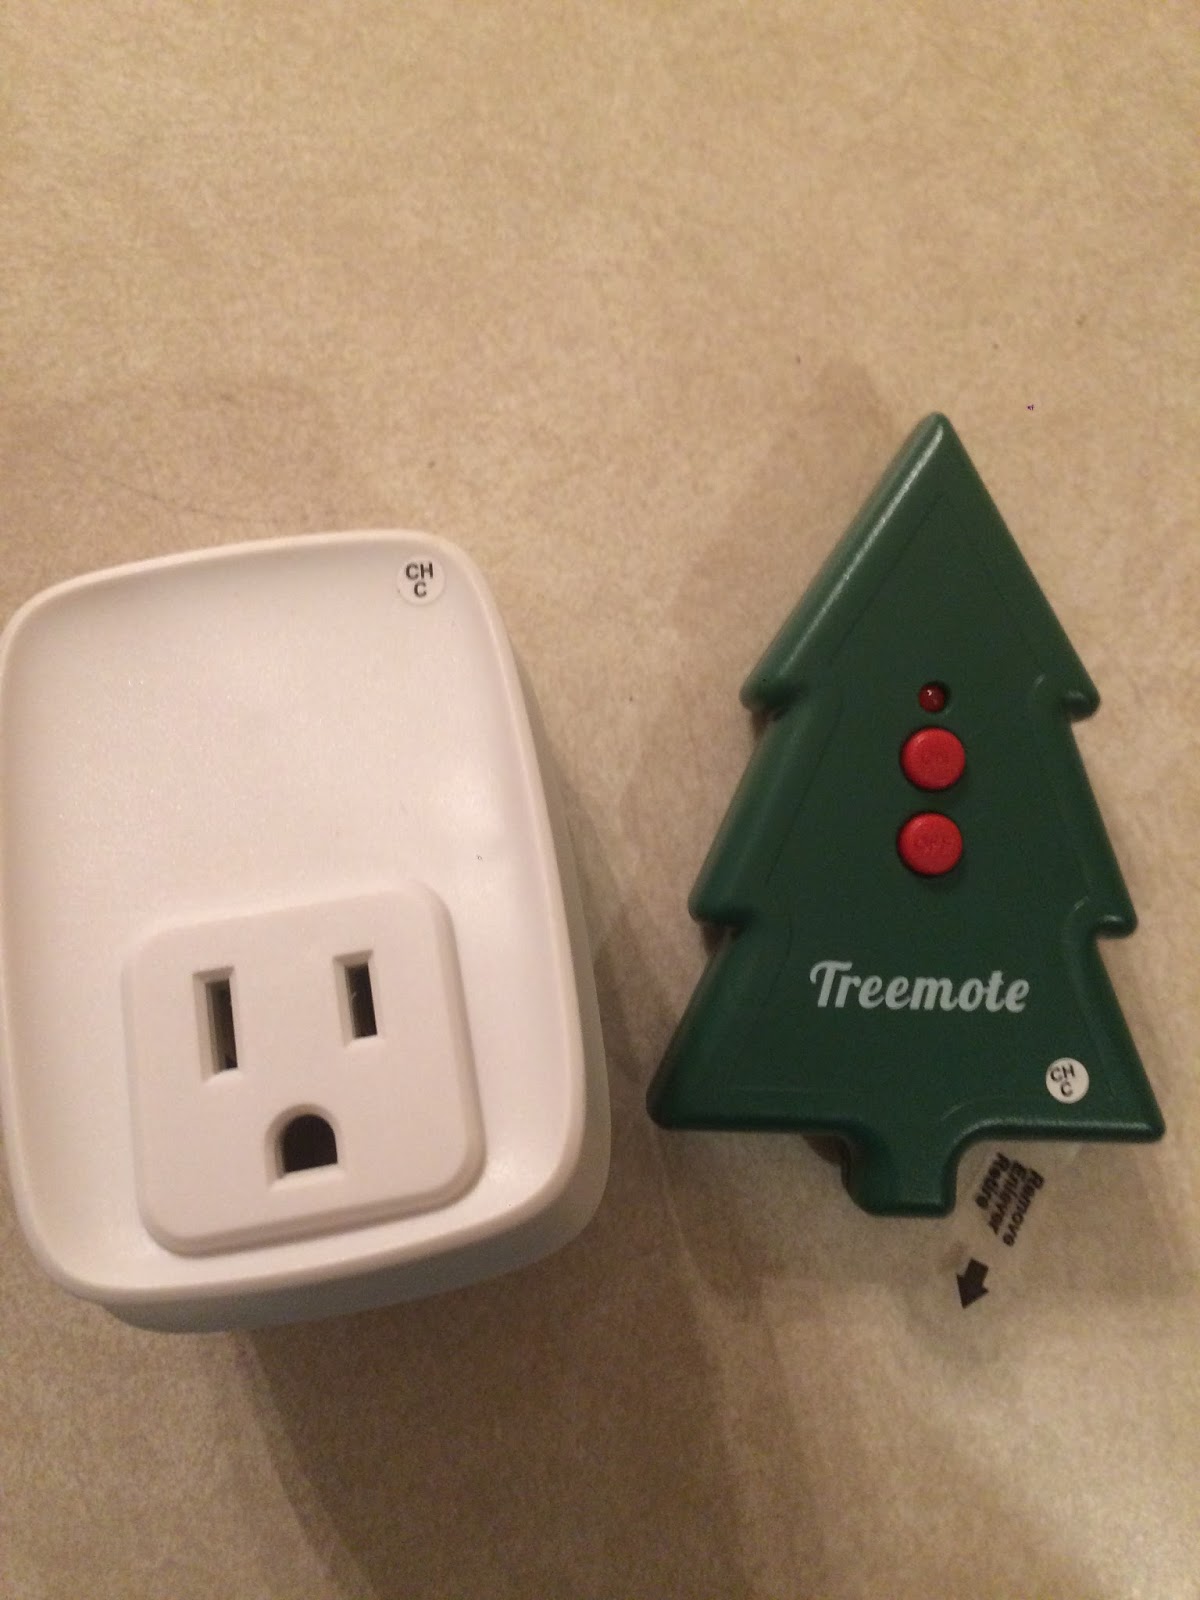 Treemote Wireless Remote Switch Control Christmas Tree Other Lights Lamp On  Off